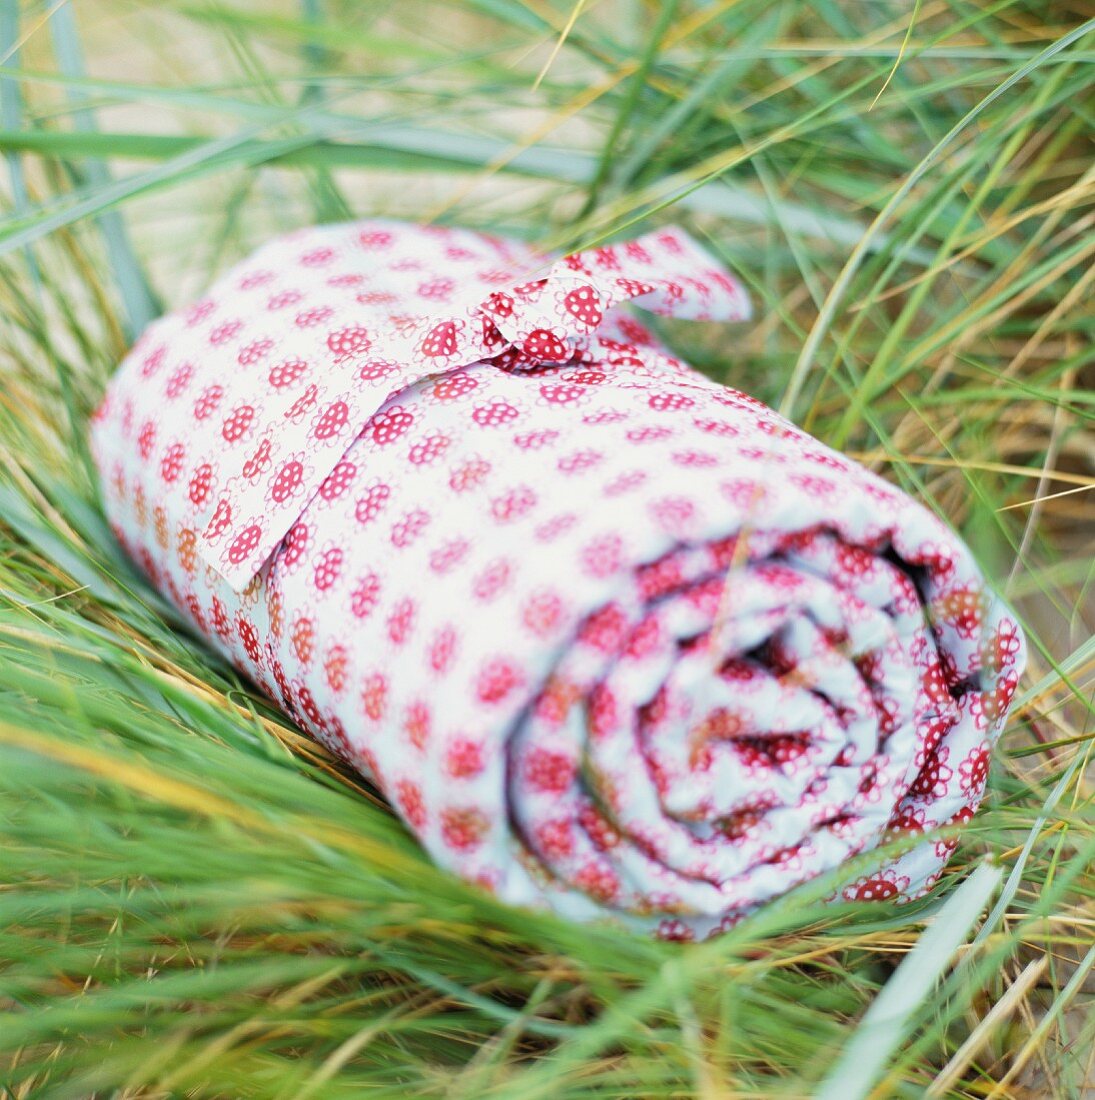 Close-up of rolled up blanket on grass